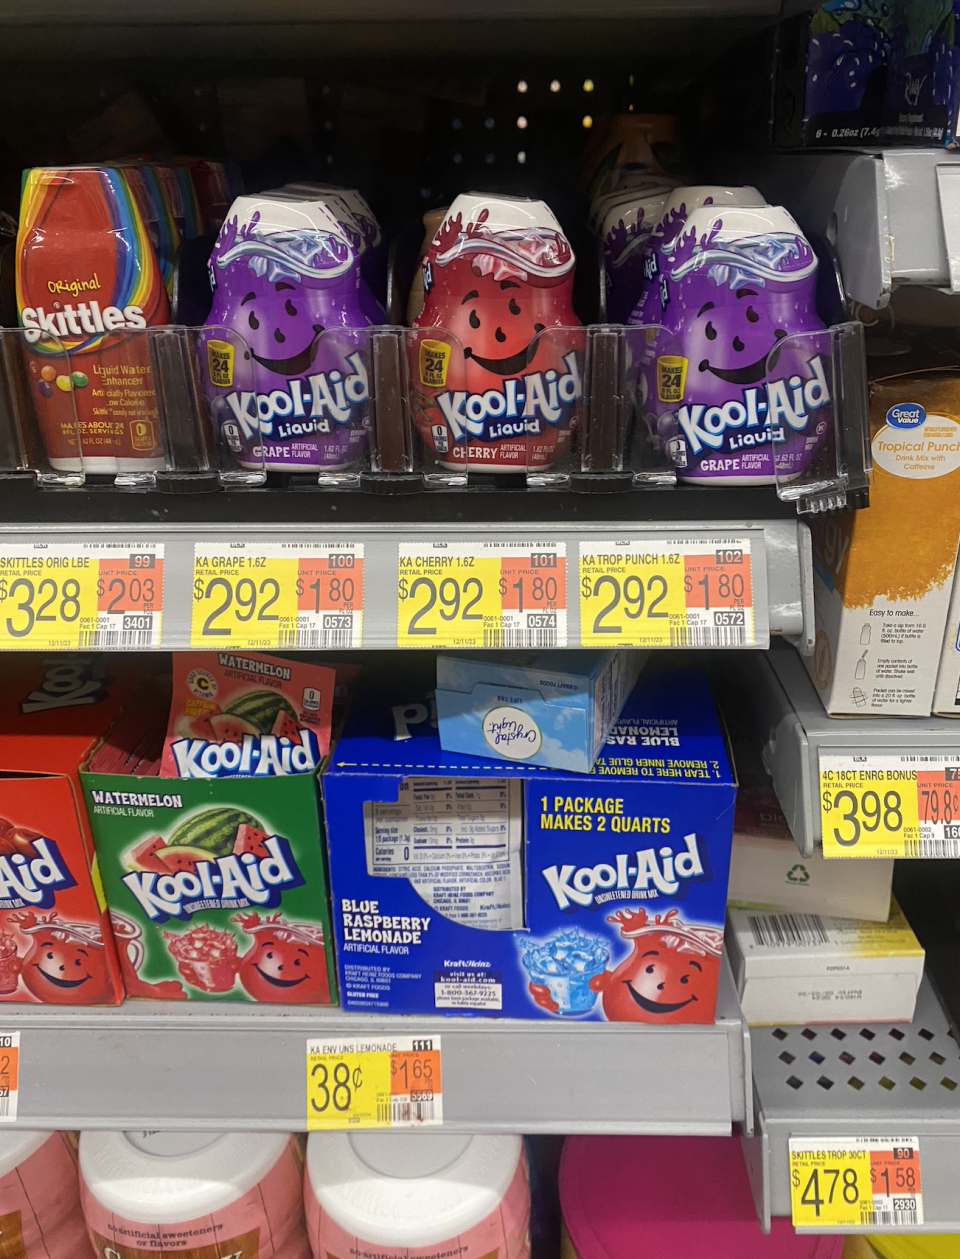 Shelf with assorted Kool-Aid drink mixes, Skittles candy, and other beverages. Prices and product labels are visible below each item